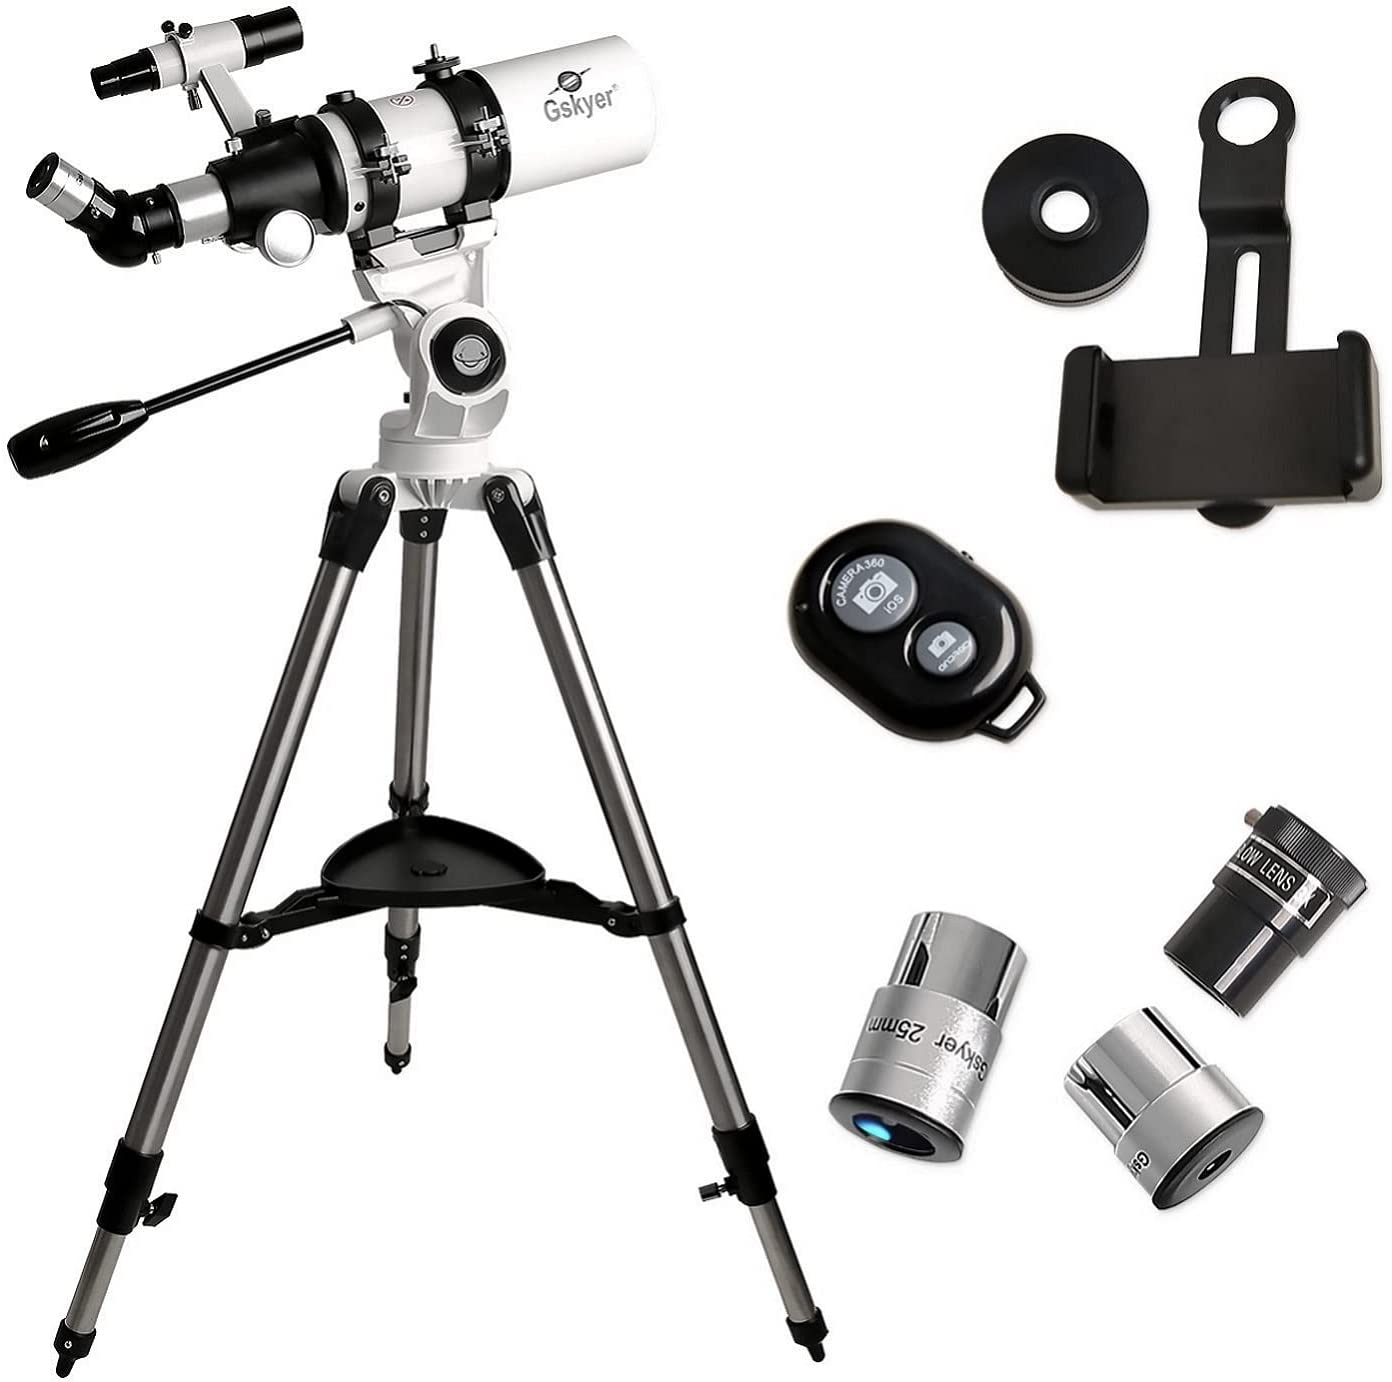 A Gskyer 80mm refractor telescope plus all the accessories you receive with the telescope.